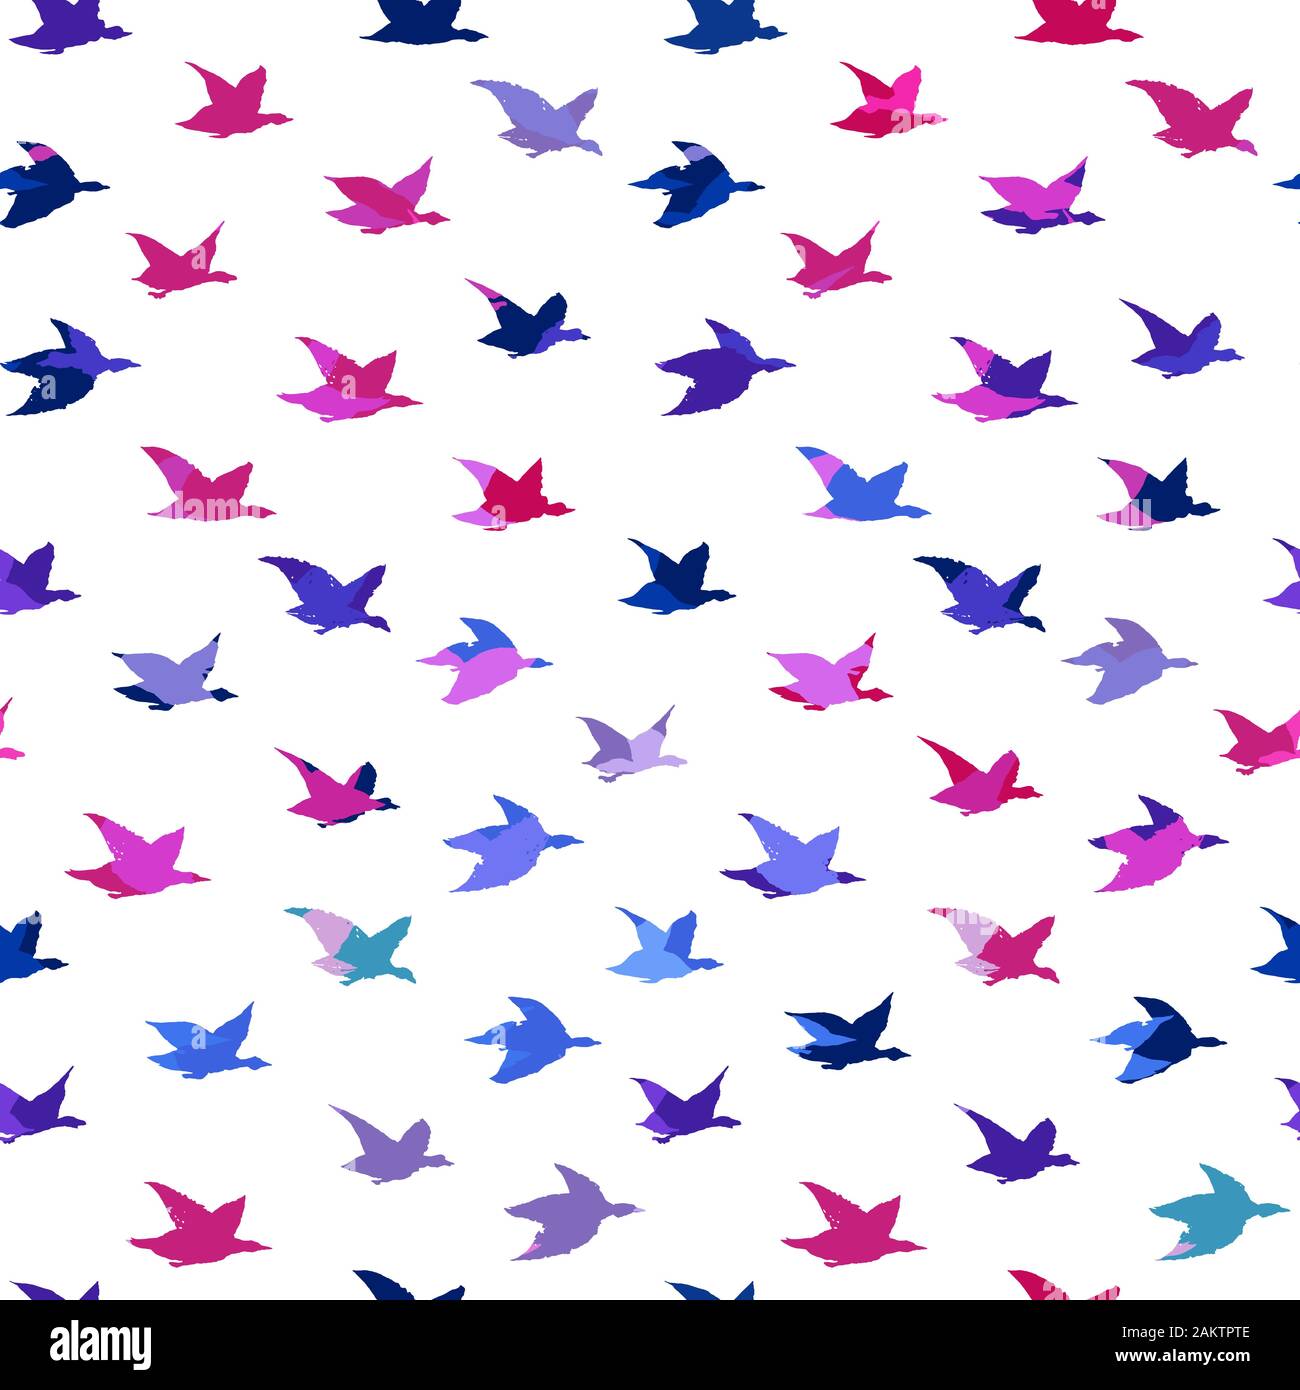 Bright Multicolored Colorful Crane Birds Japanese Print. Seamless Pattern with Simple Birds Silhouettes for fabrics textile print design, wallpapers, backdrops. Flying elegant swallows Stock Vector